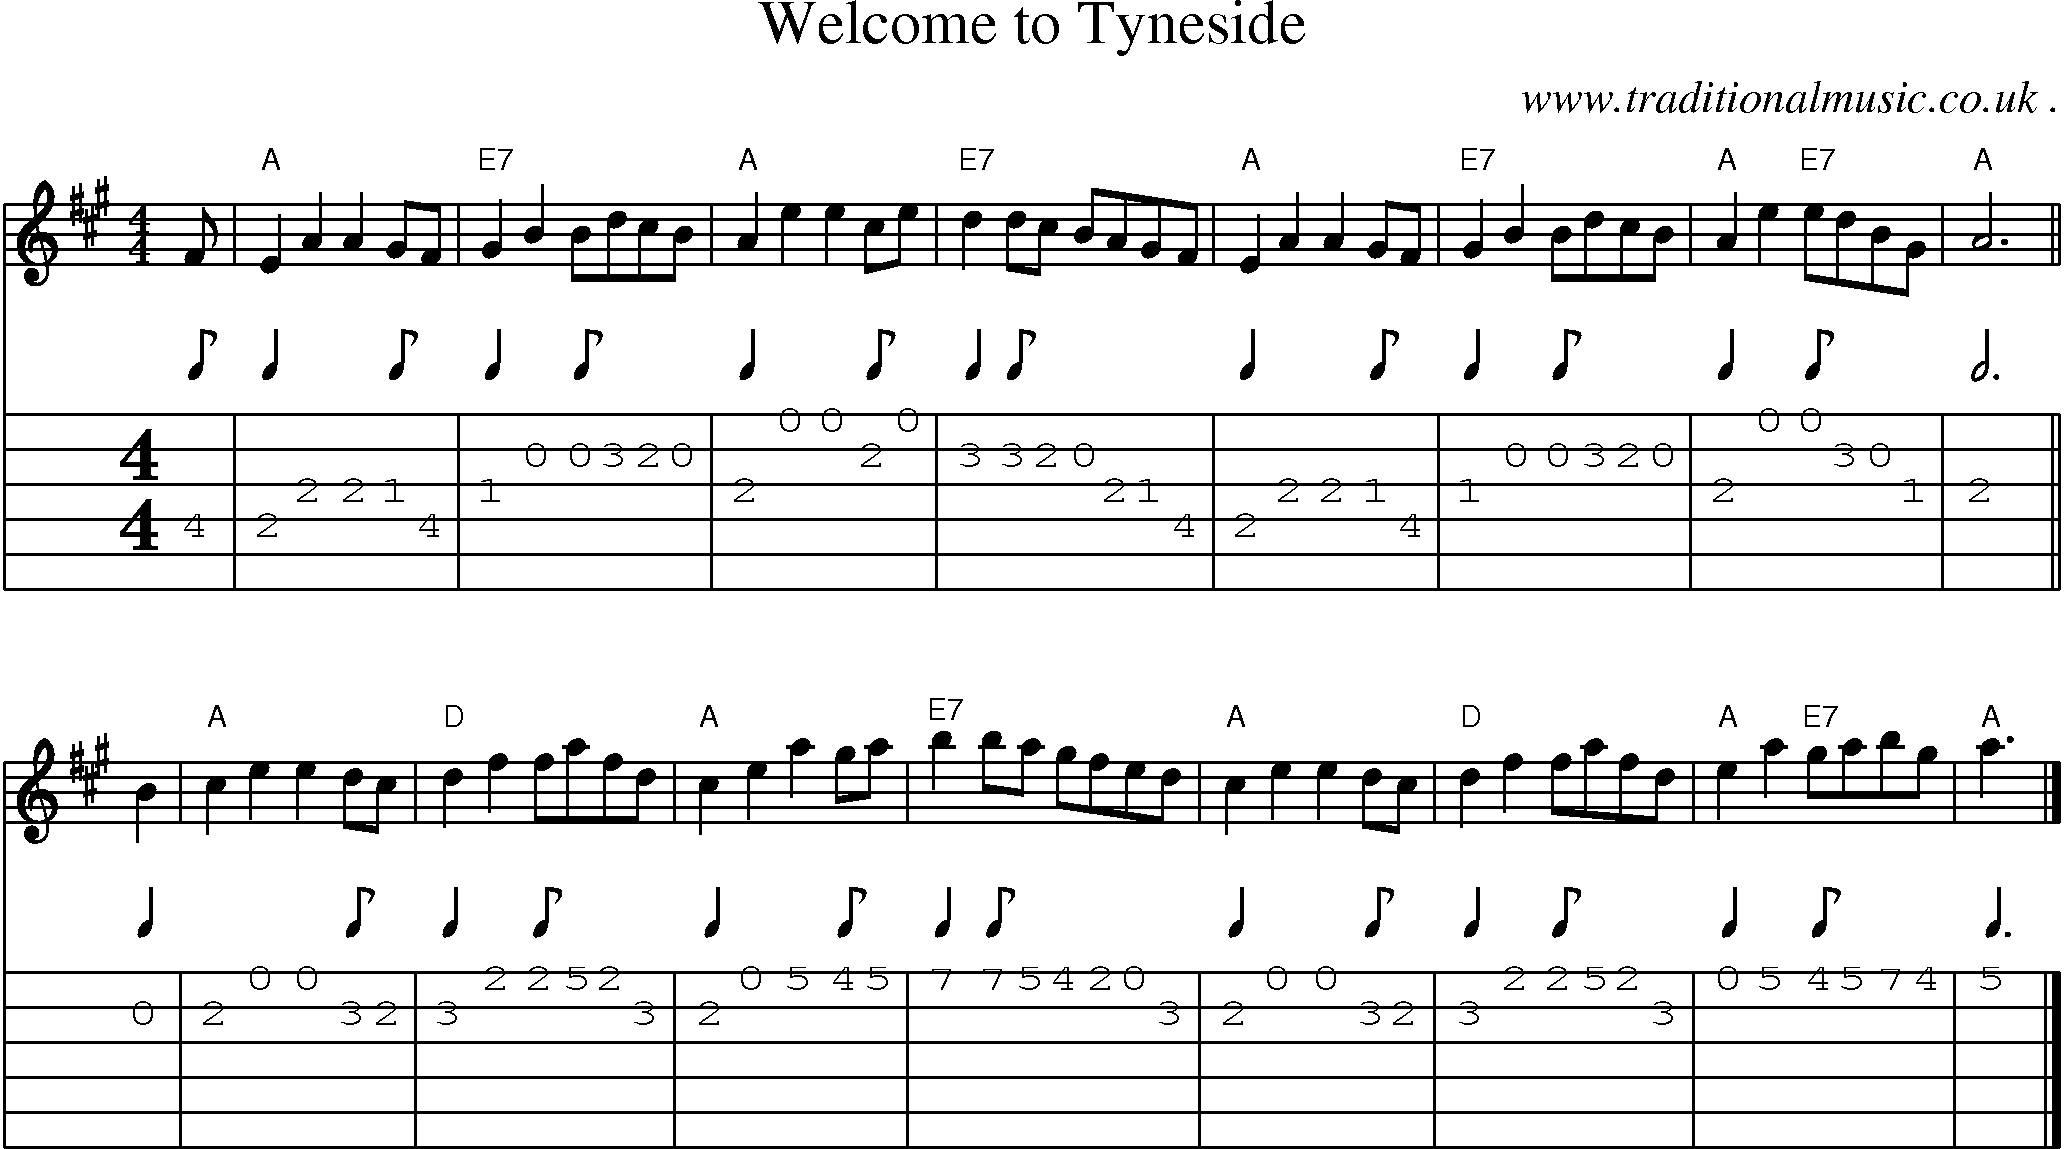 Sheet-music  score, Chords and Guitar Tabs for Welcome To Tyneside